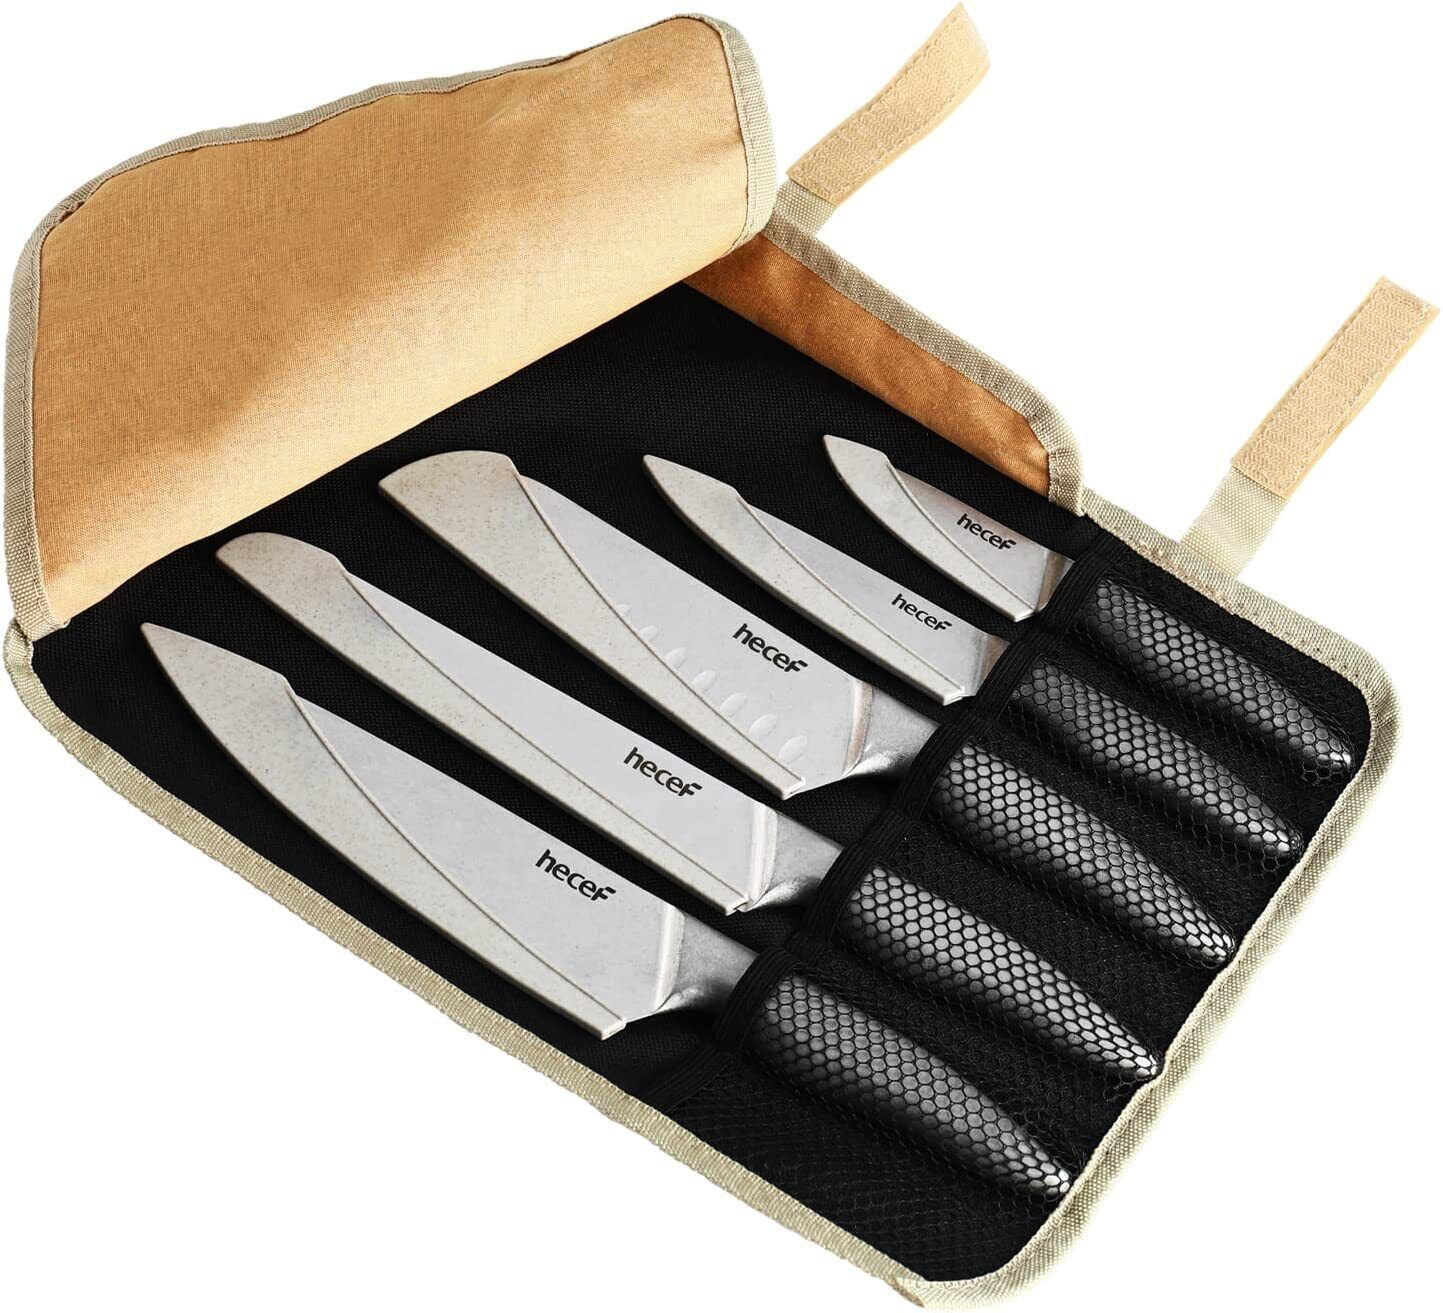 Hecef 5 Pcs Black Kitchen Knife Set with Sheaths, All Metal One